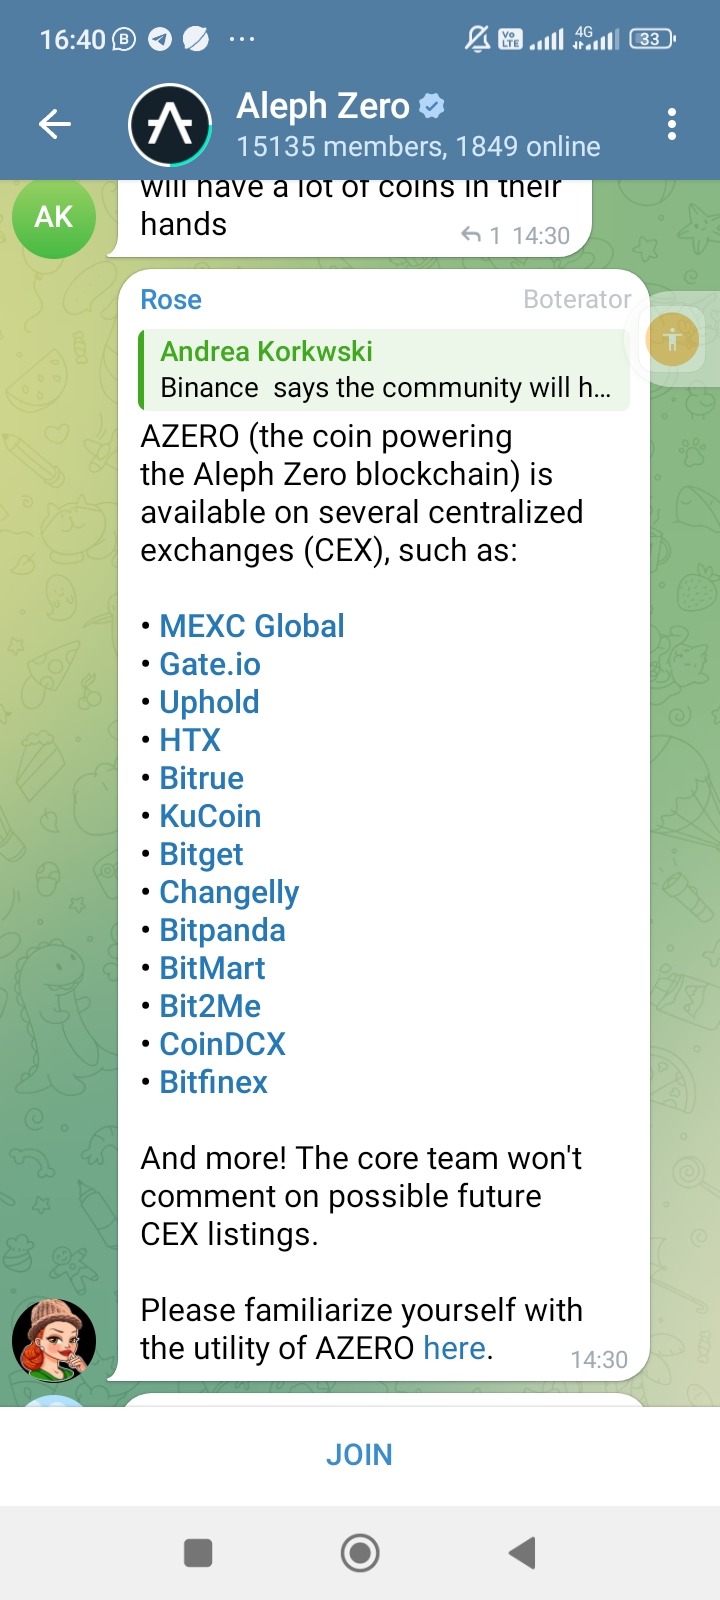 Aleph Zero backed by many exchanges